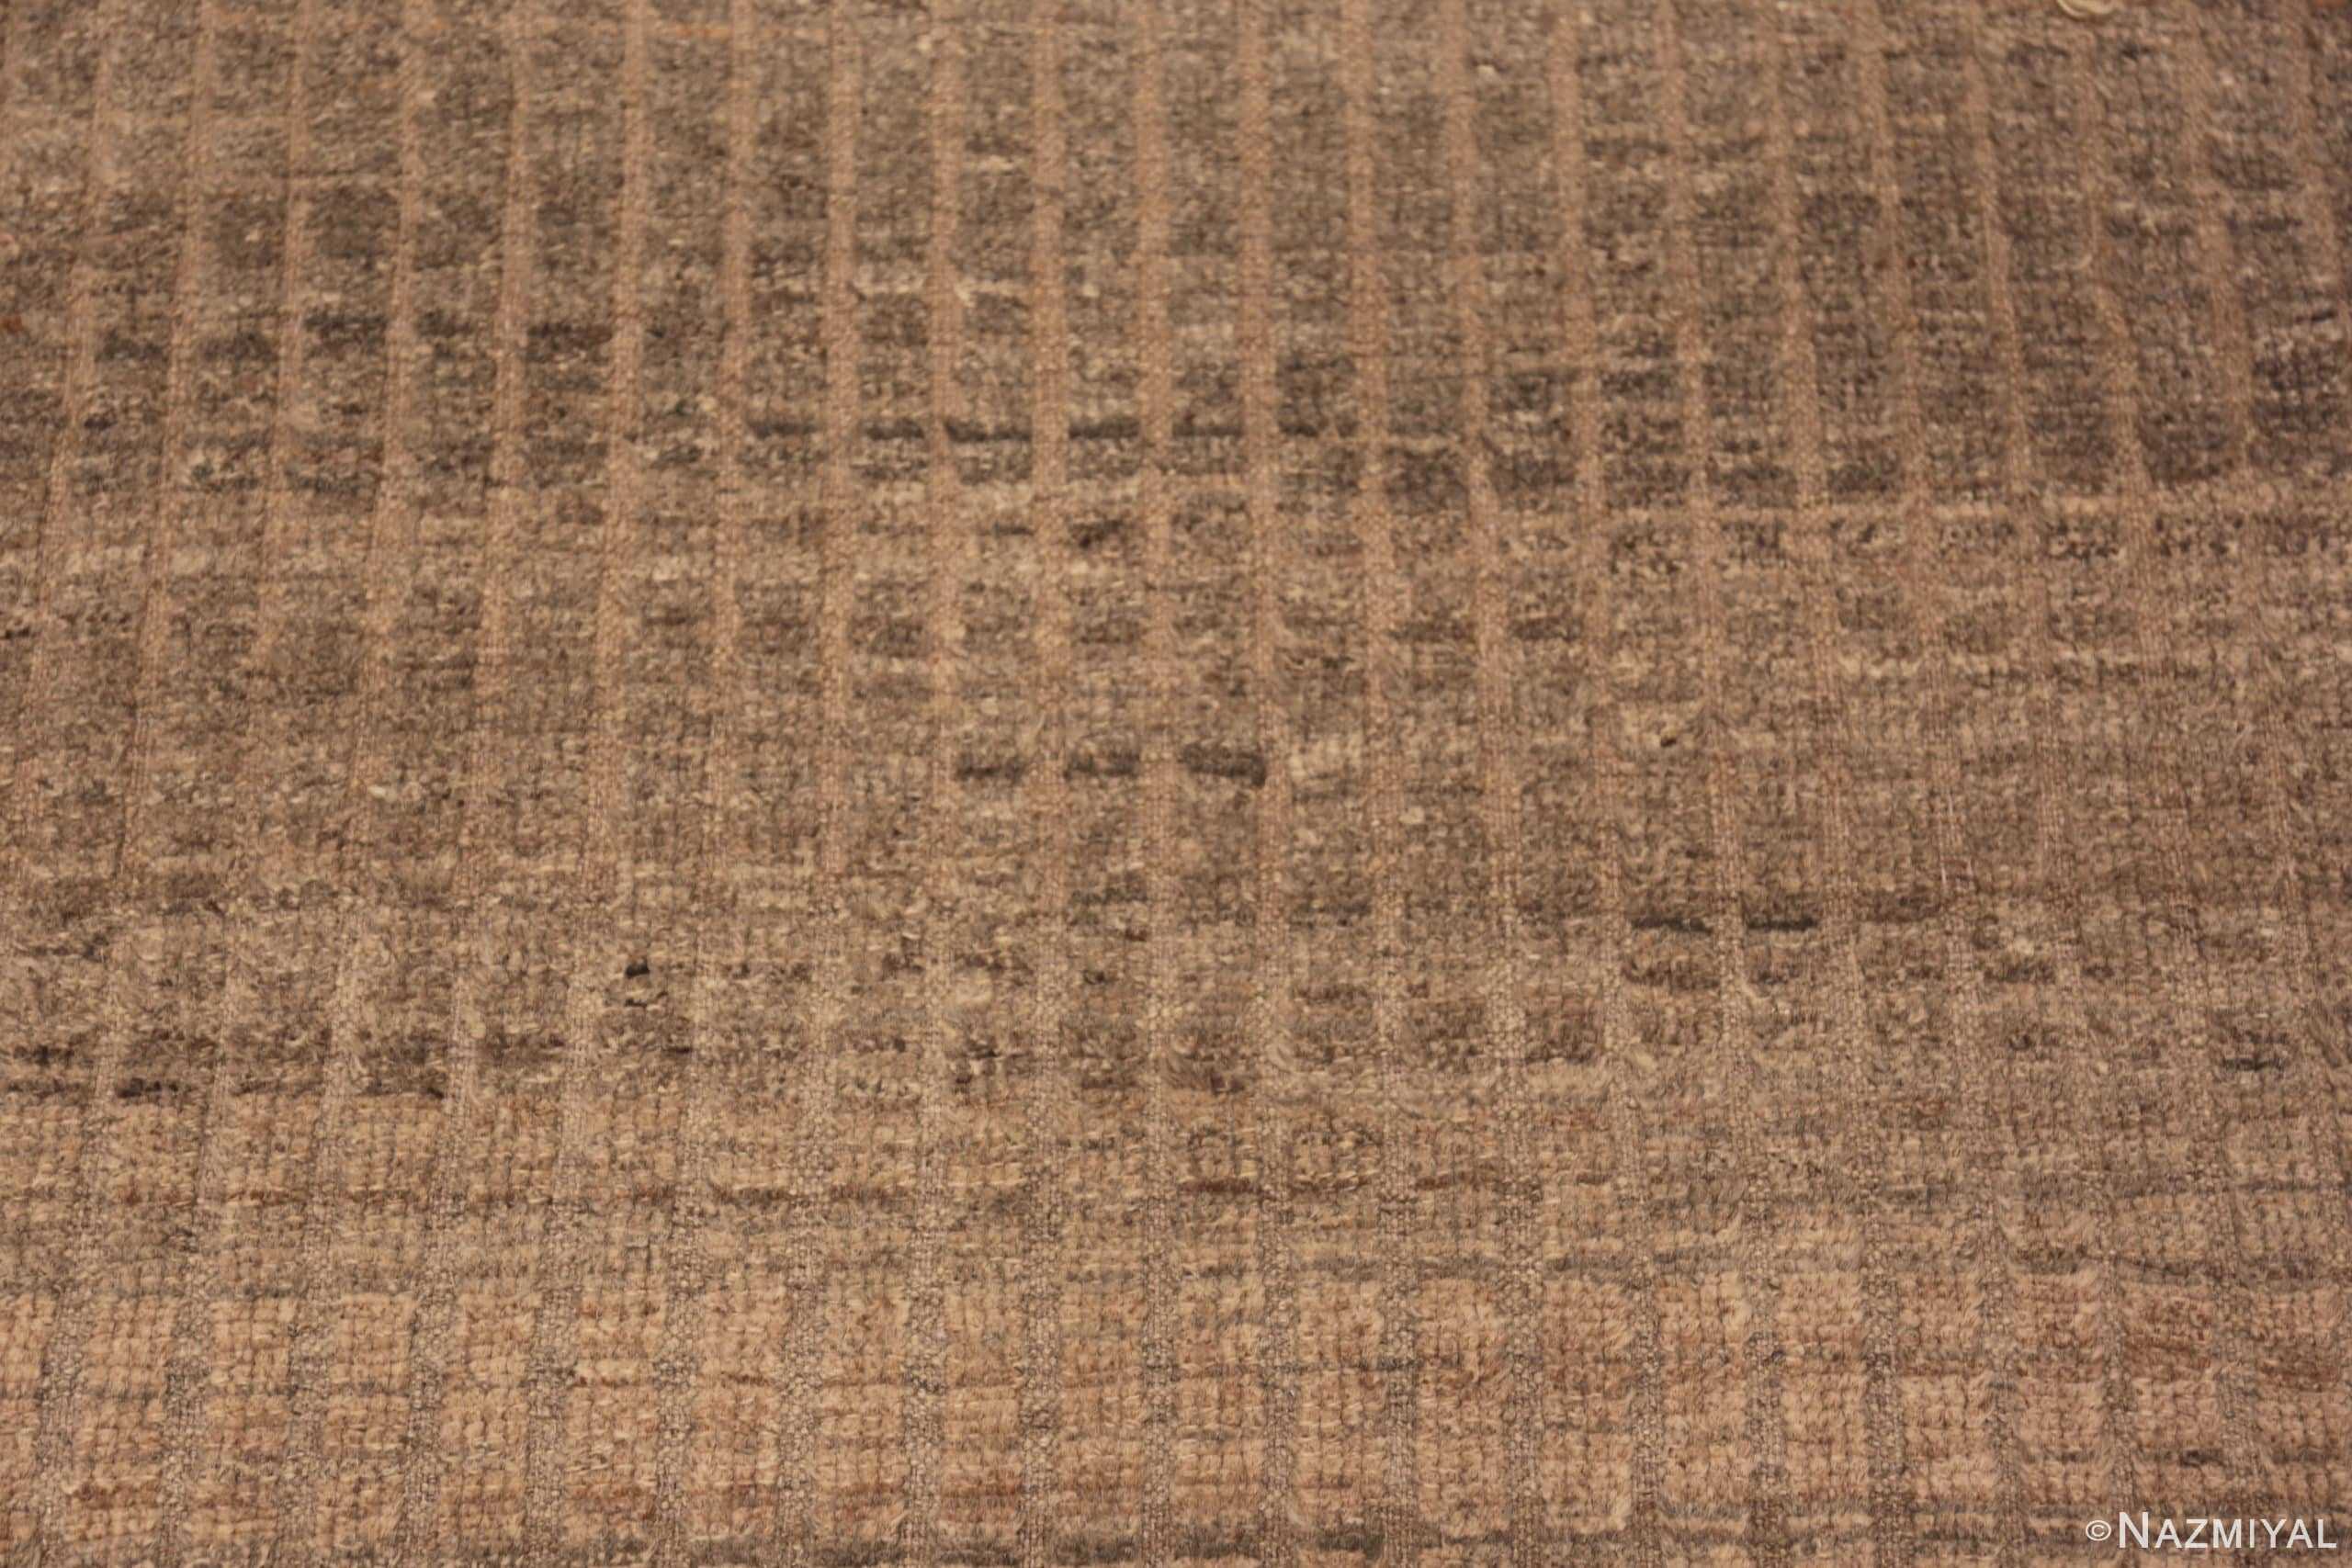 Detail Of Earthy Tones Modern Moroccan Rug 61008 by Nazmiyal Antique Rugs